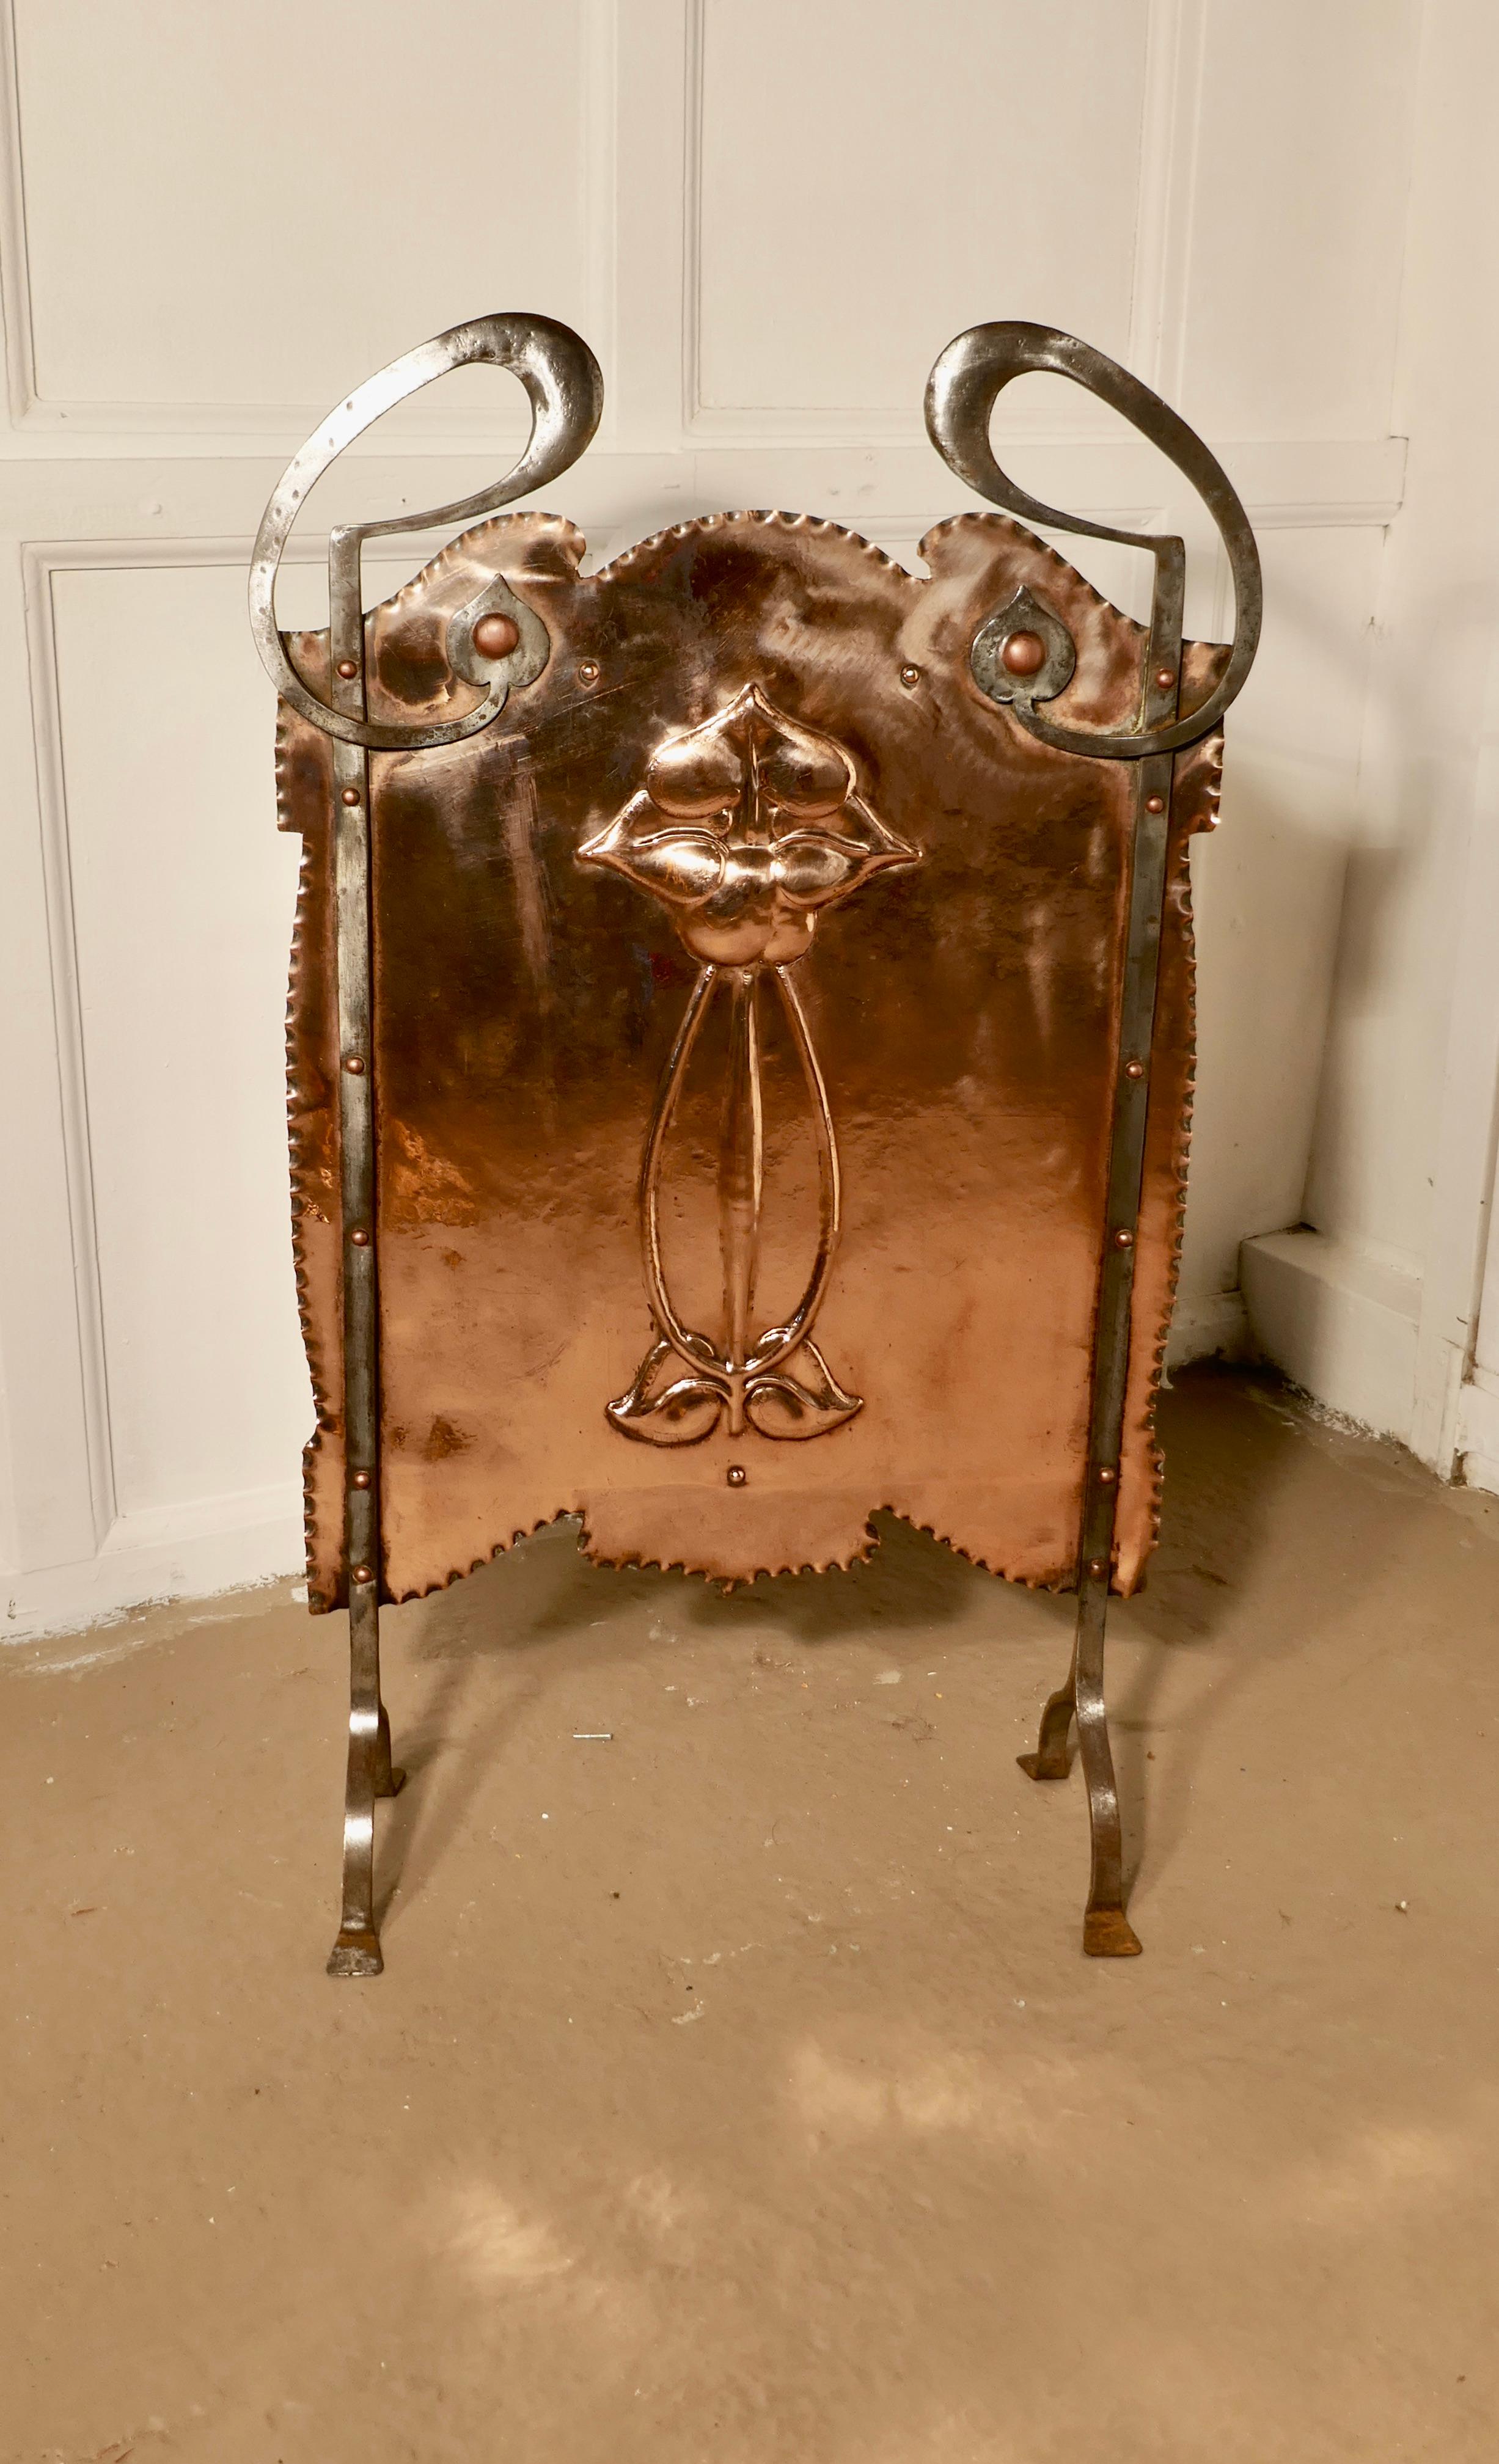 Victorian Art Nouveau copper and polished steel fire screen

This is a Classic Art Nouveau style fire screen, it is a beaten copper screen, which is mounted on very stylish polished steel feet which carry all the way to the top culminating with